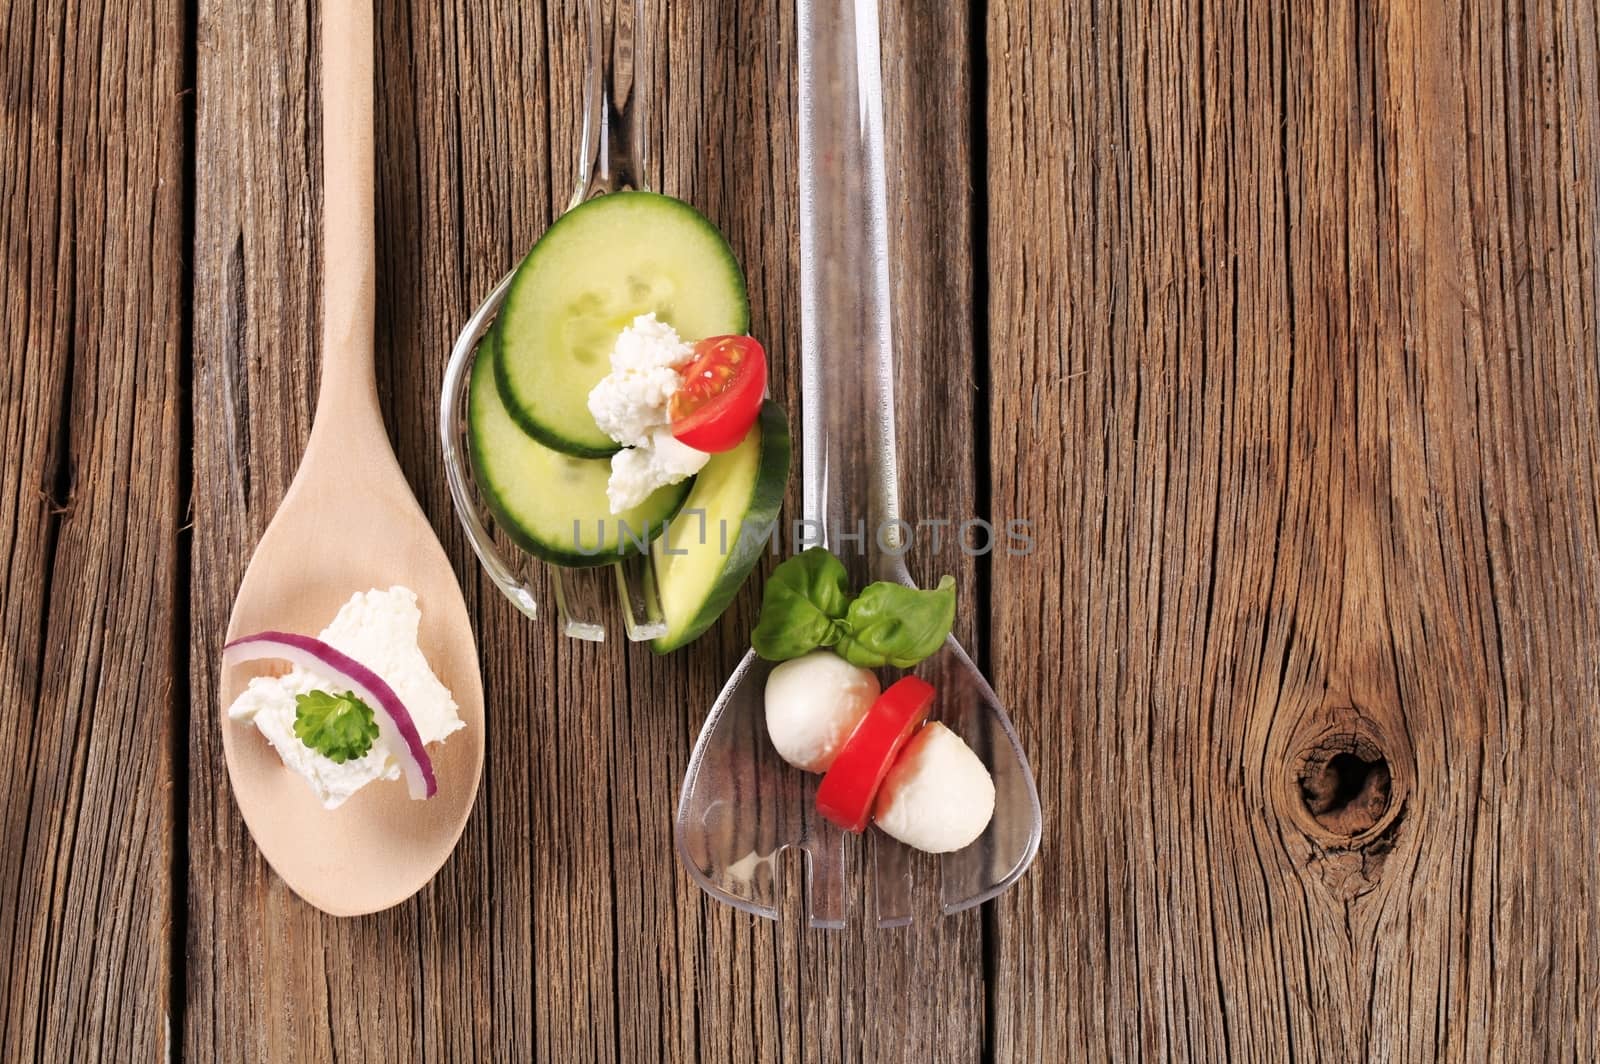 Fresh cheese and vegetables on salad spoons